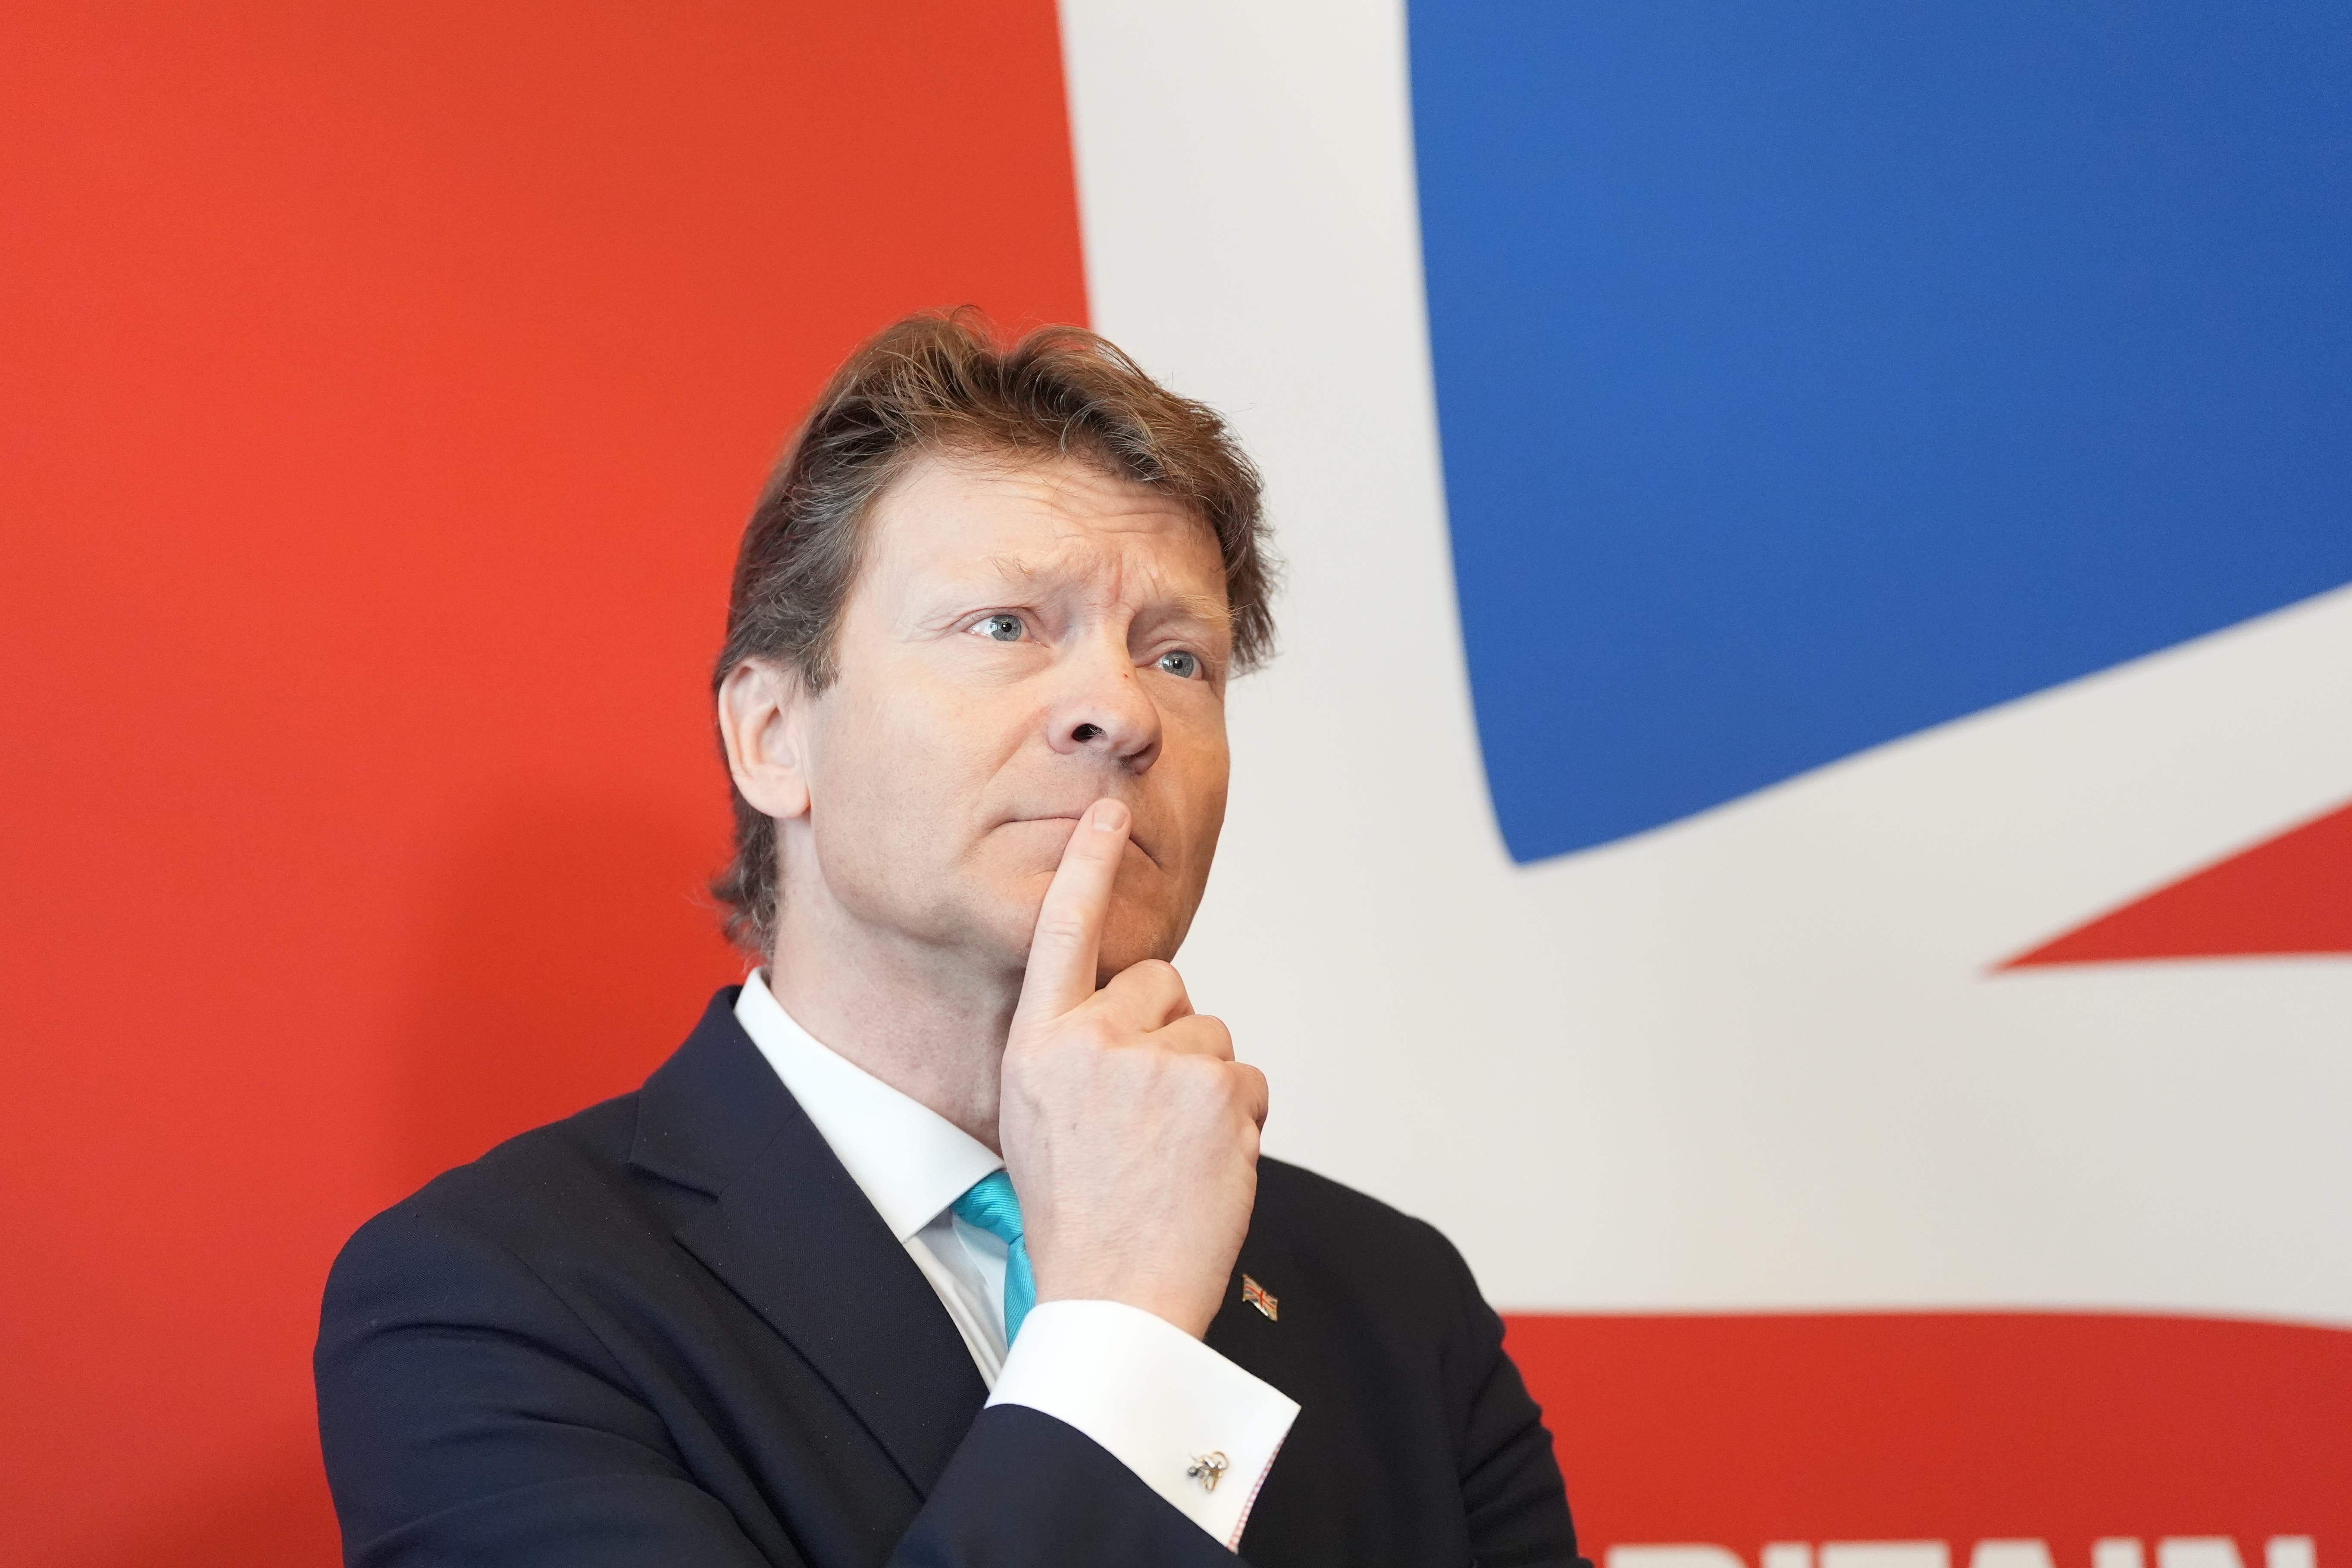 Reform UK leader Richard Tice attacked Labour’s plans for the NHS as “betraying decent working people”